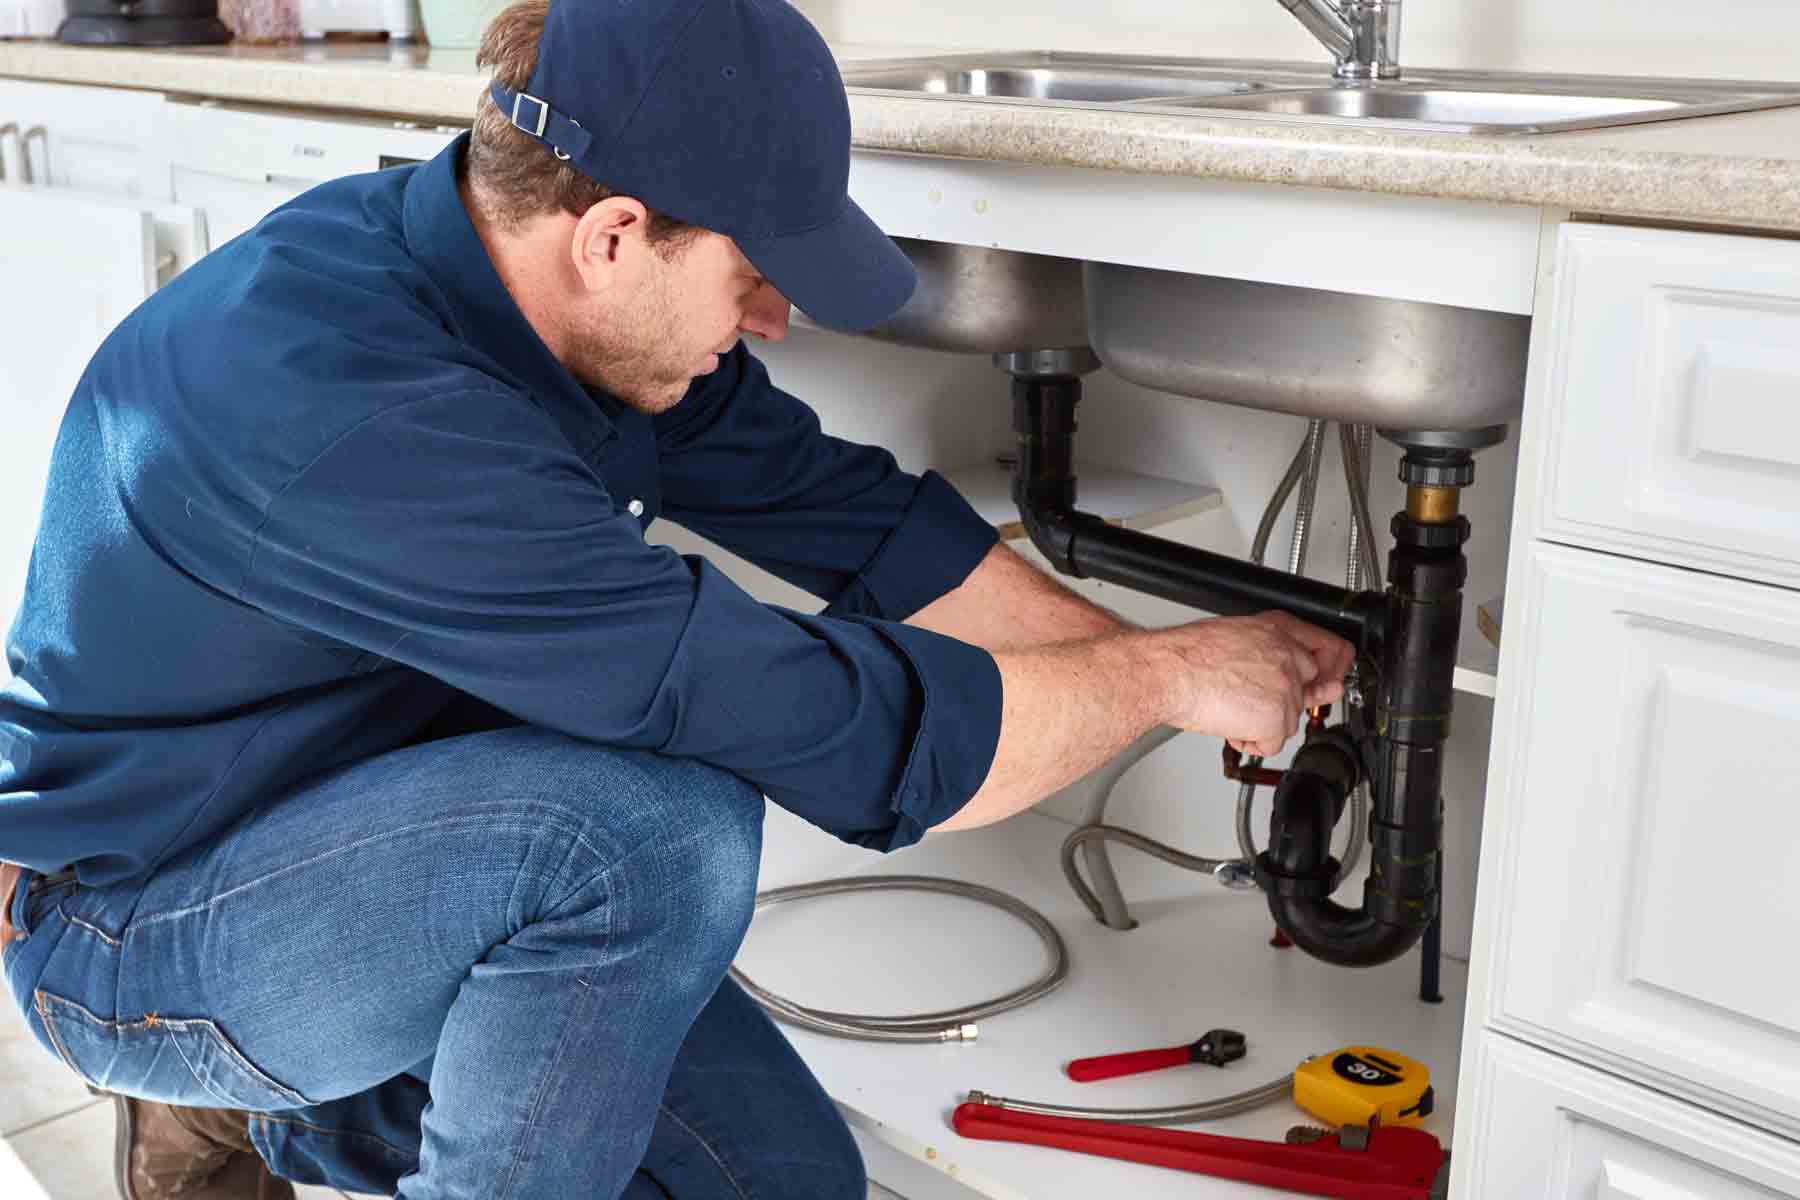 Find a plumbing repair services near you